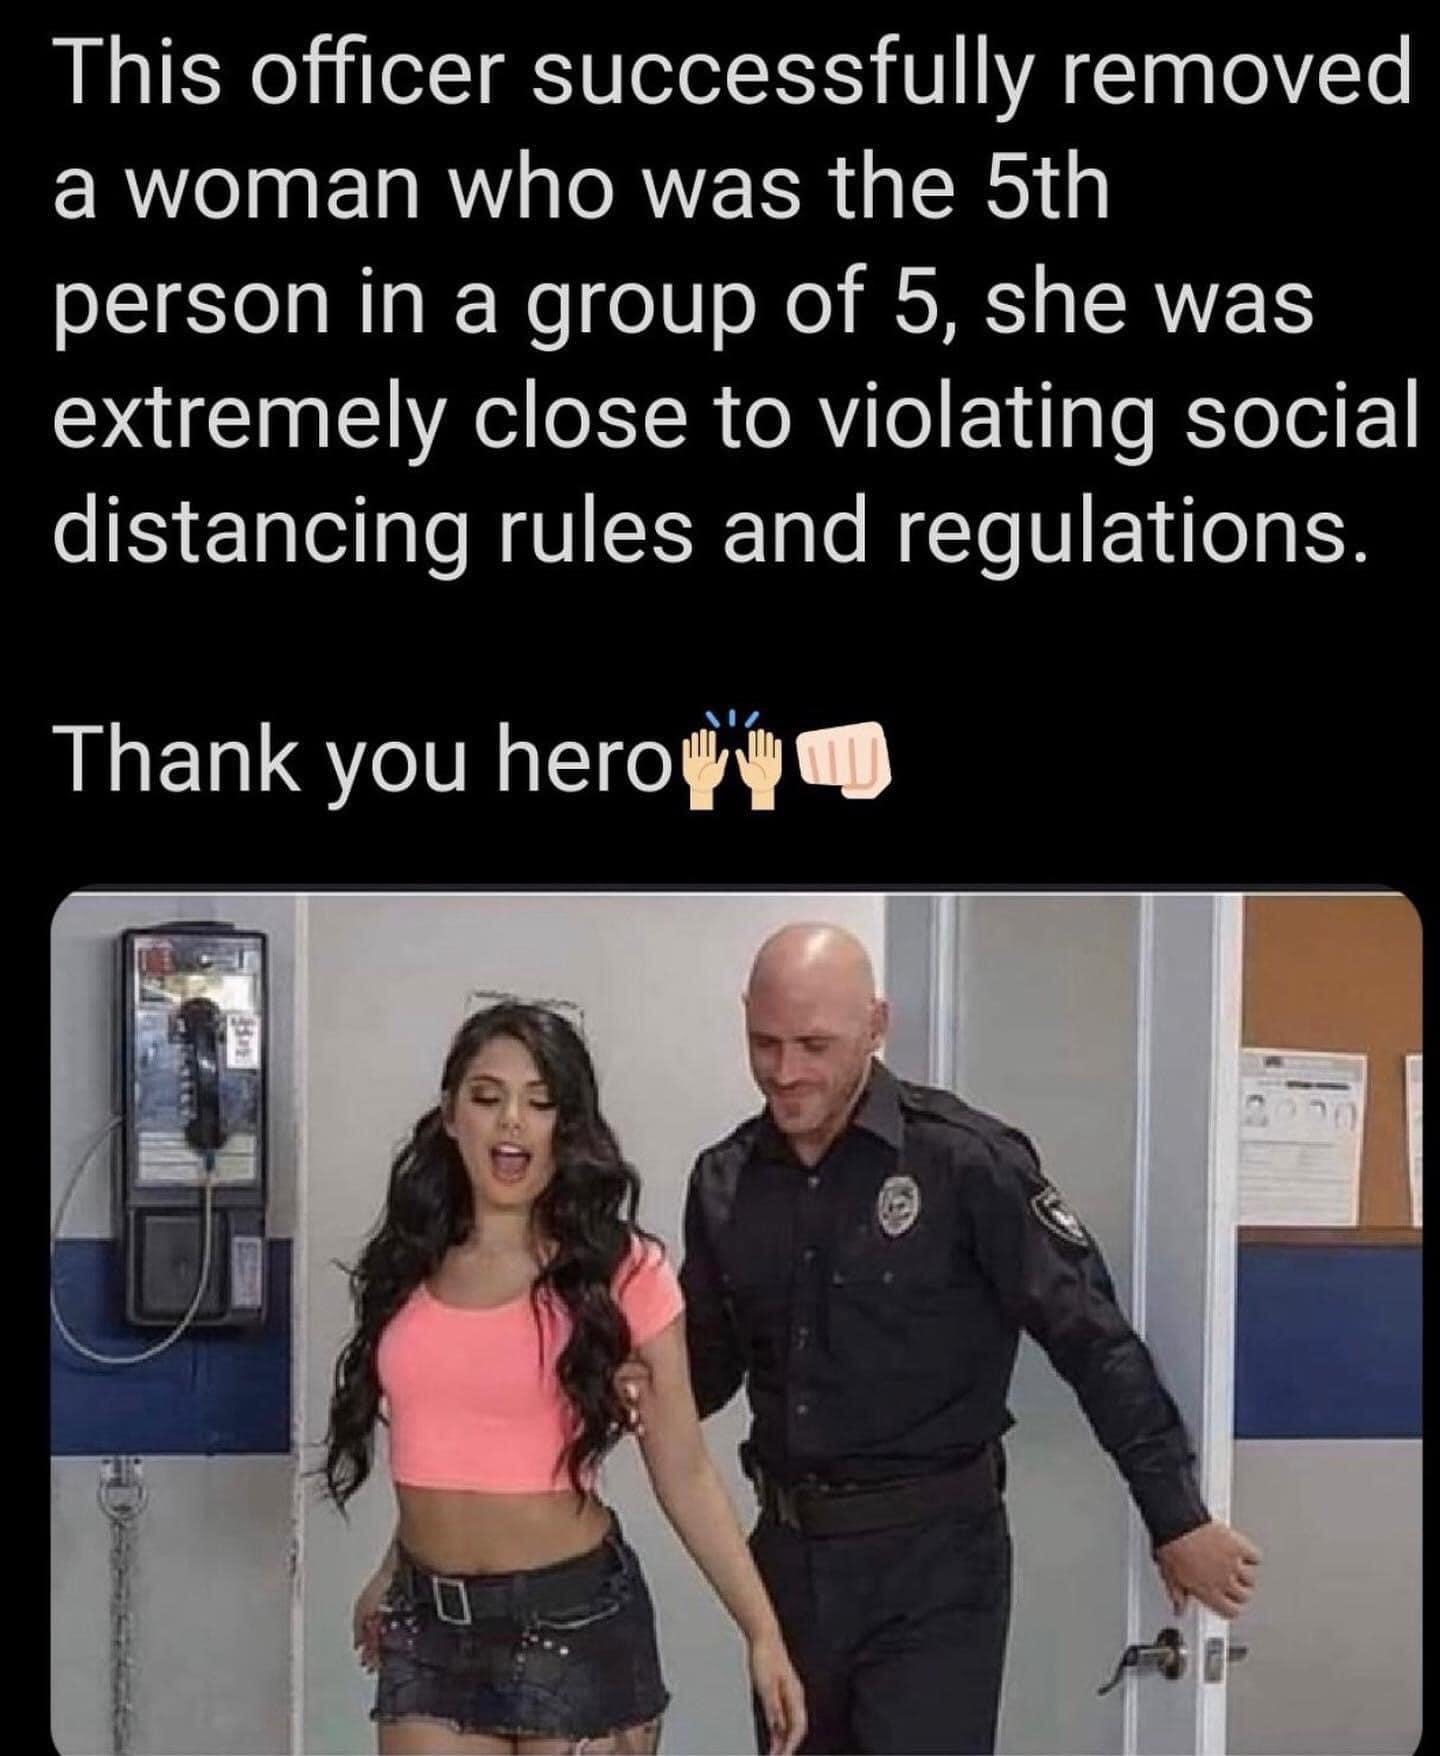 This officer successfully removed a woman who was the 5th person in a group of 5, she was extremely close to violating social distancing rules and regulations. Thank you herovm